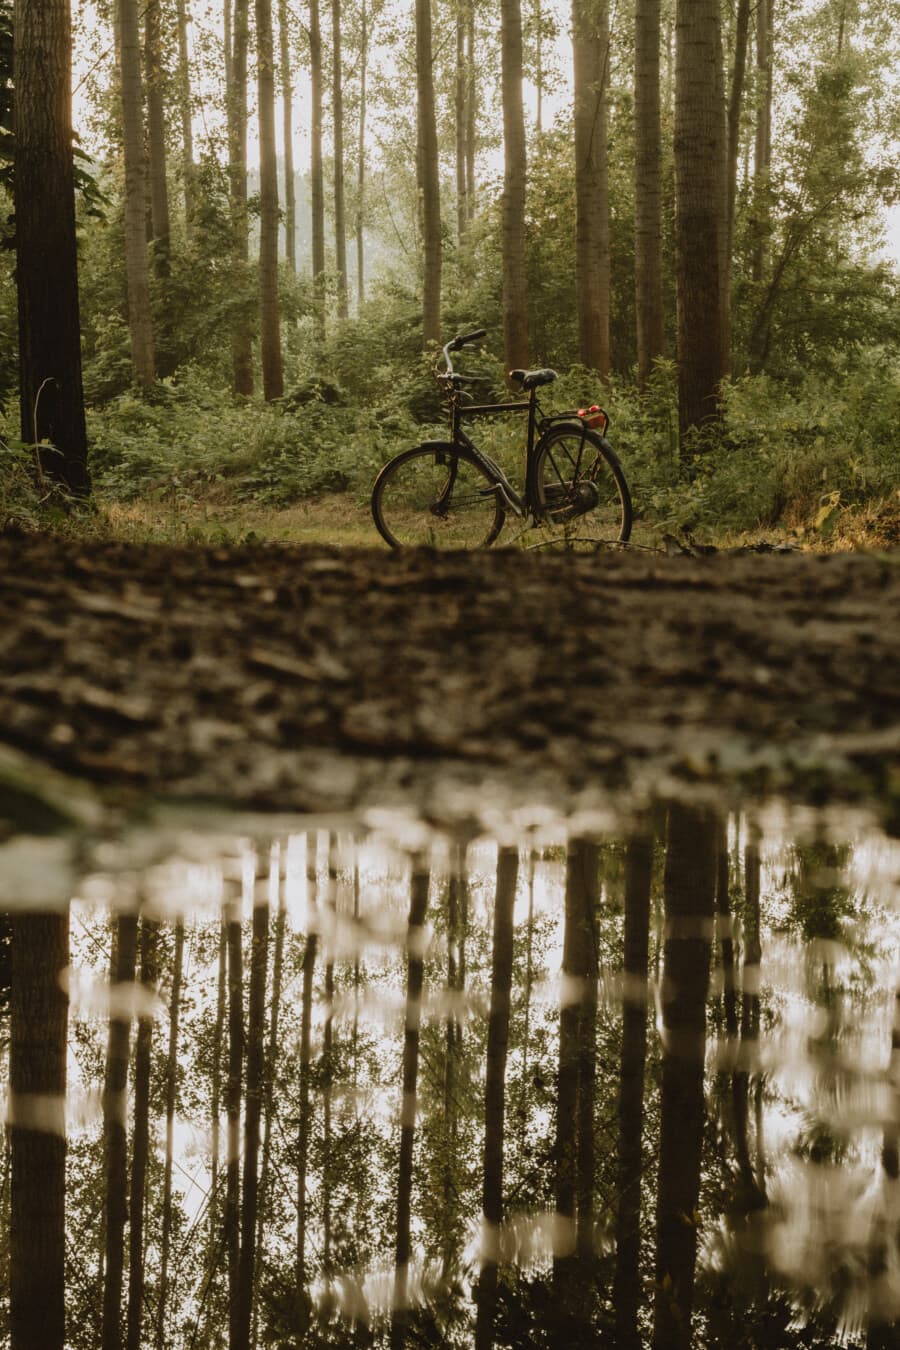 reflection, pond, mud, forest trail, bicycle, wood, forest, landscape, tree, nature